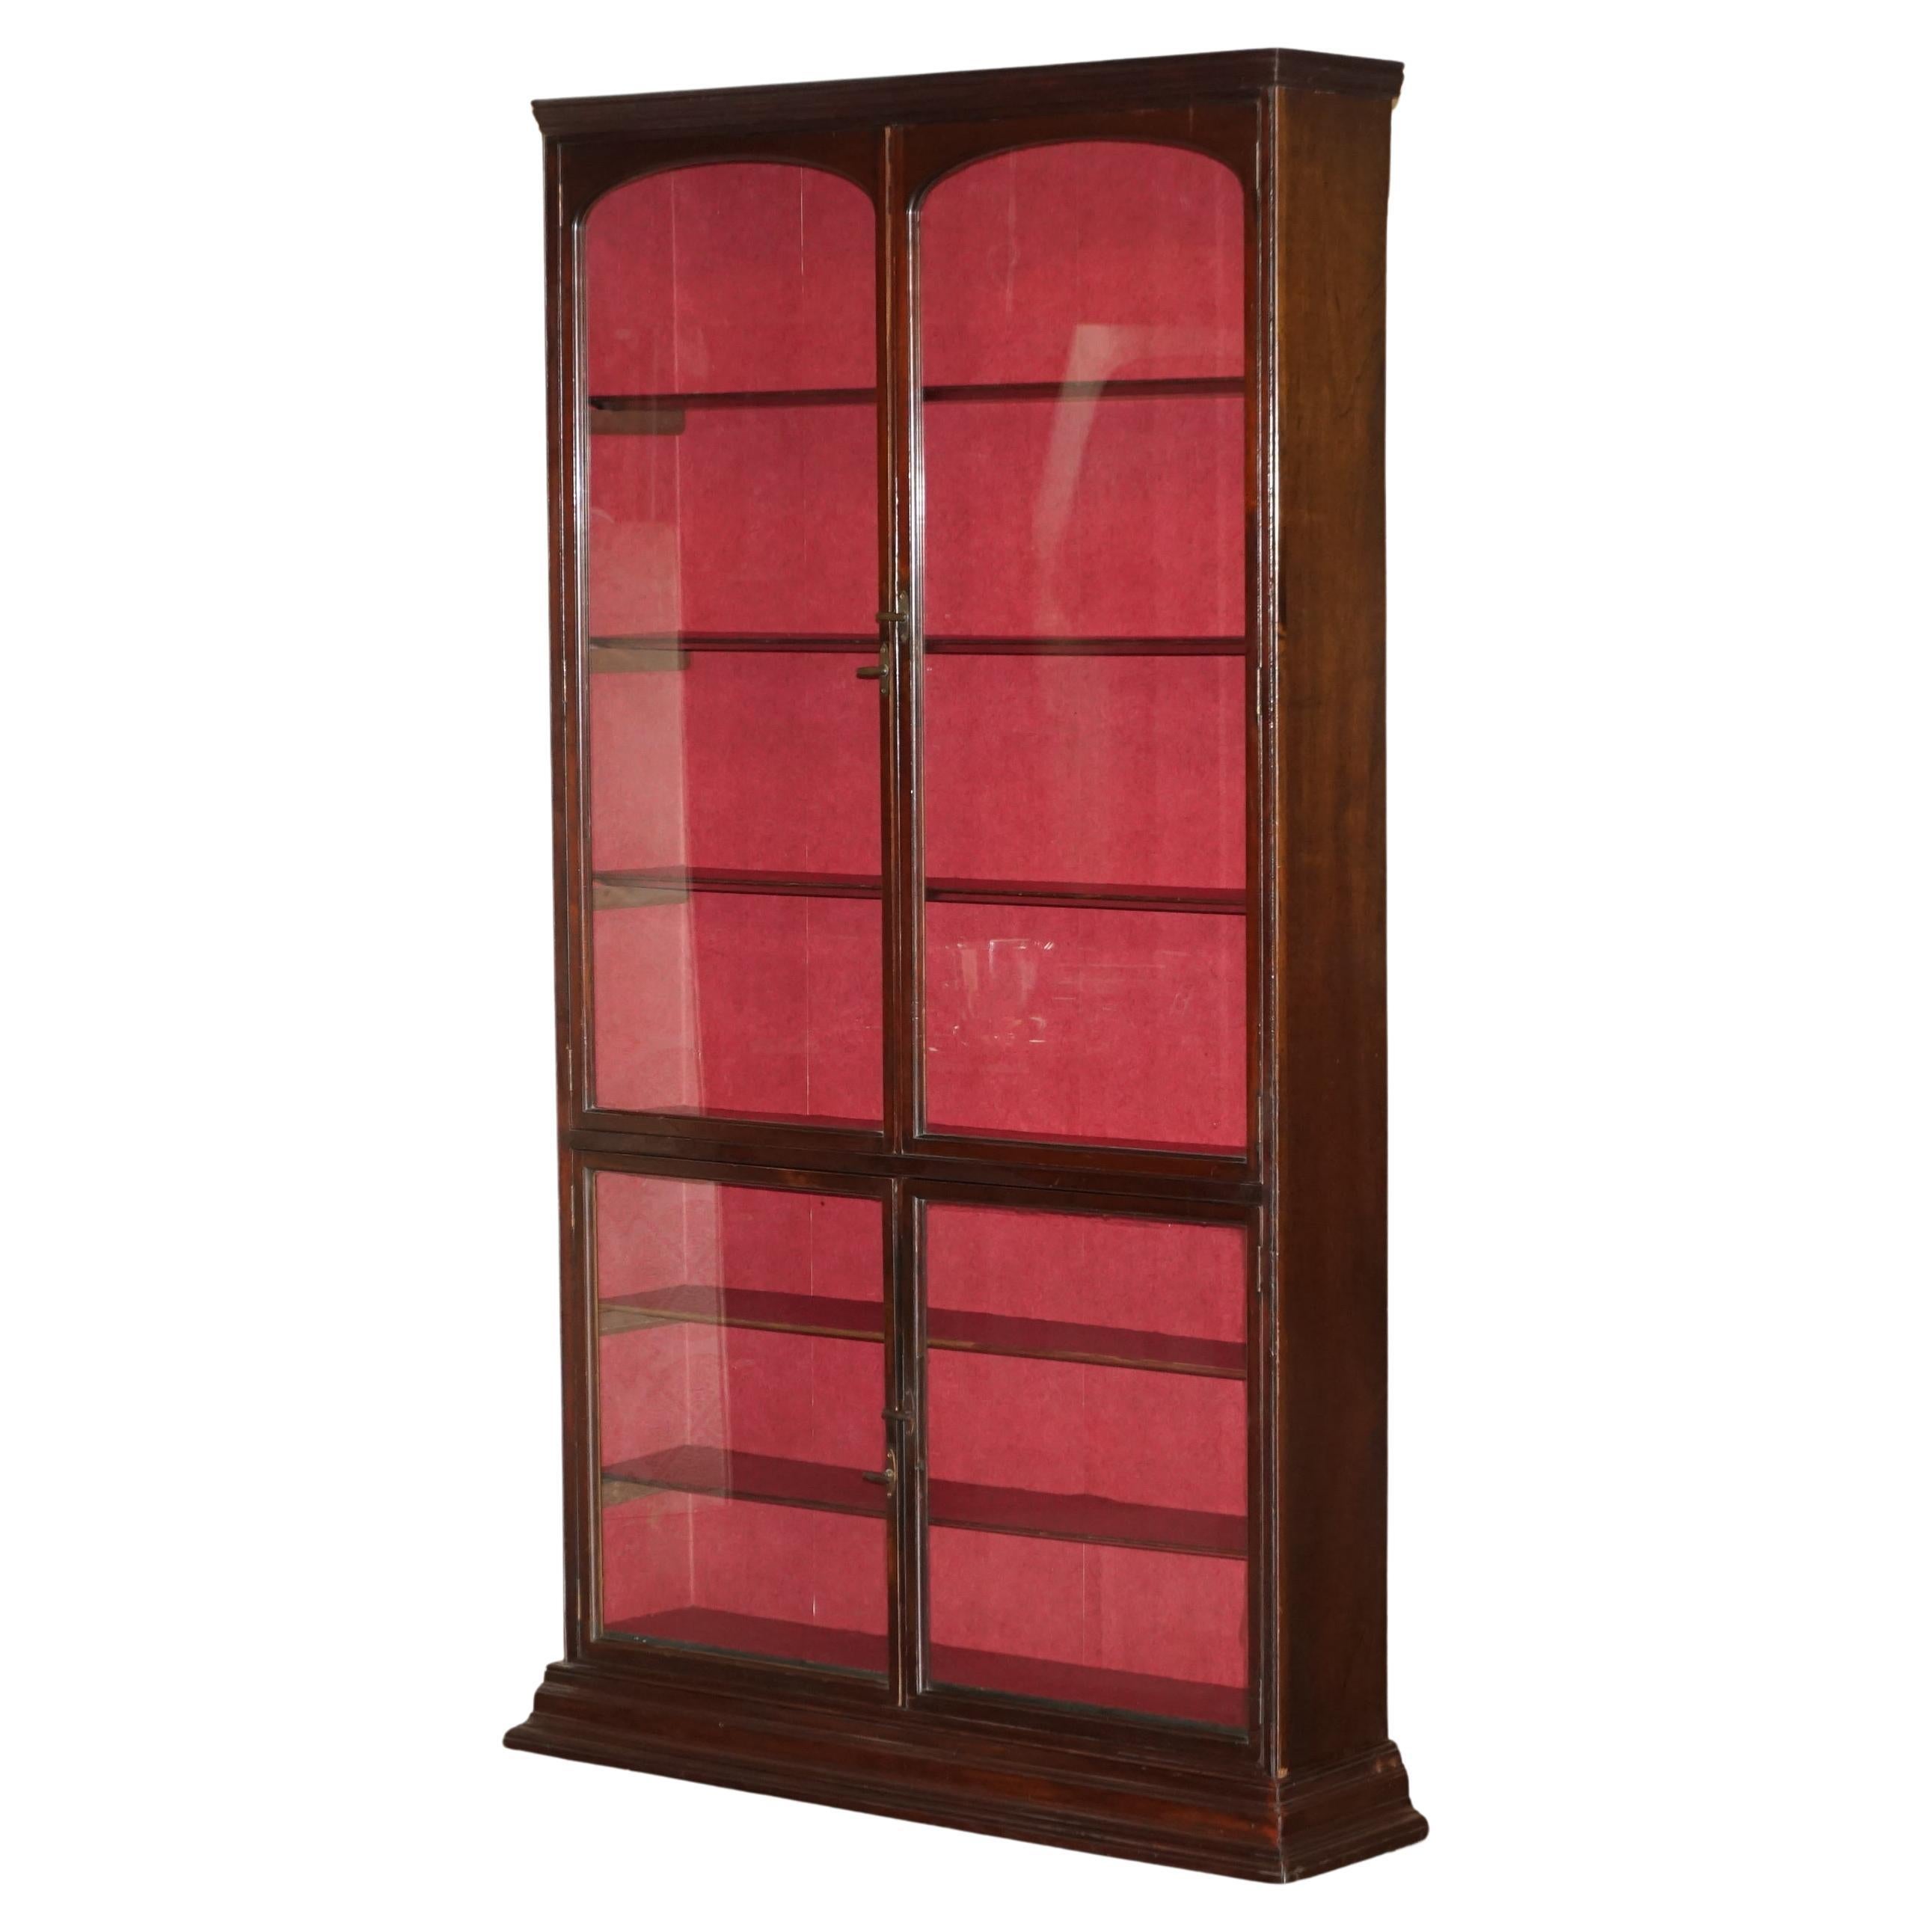 Grande librairie d'APOTHECARY VICTORIAN HABERDASHERY APOTHECARY SHOPS CABiNET GLAZED DOOR BOOKCASE